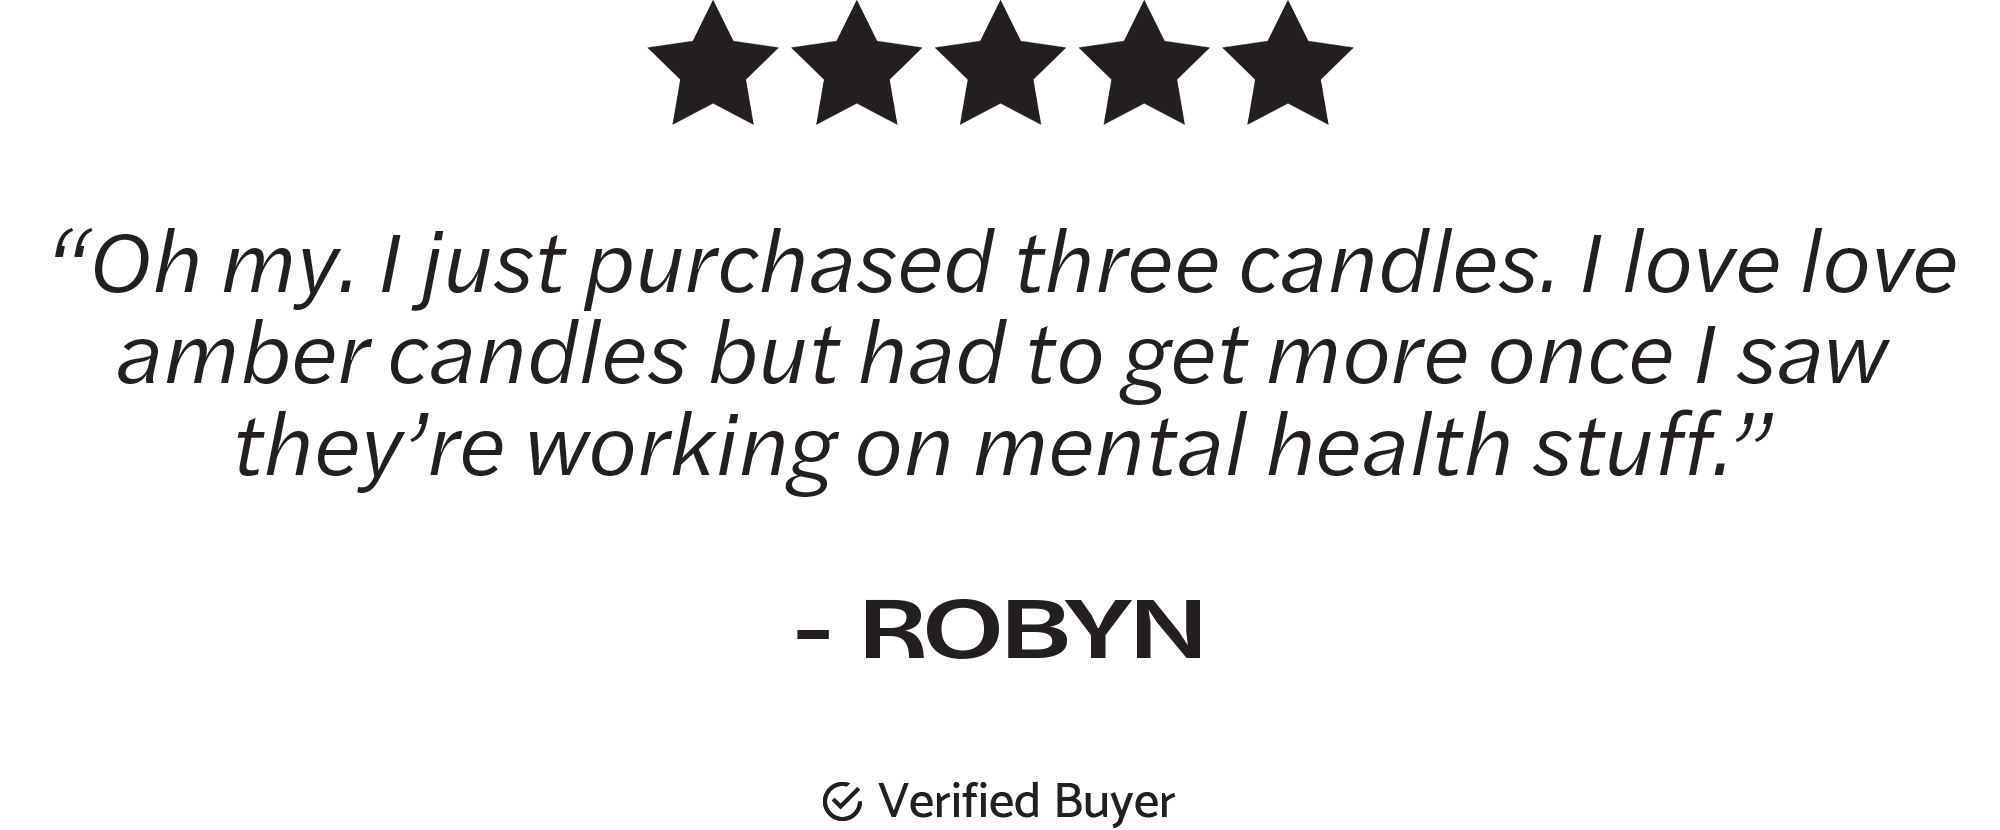 “Oh my. I just purchased three candles. I love love amber candles but had to get more once I saw they’re working on mental health stuff.”  - ROBYN